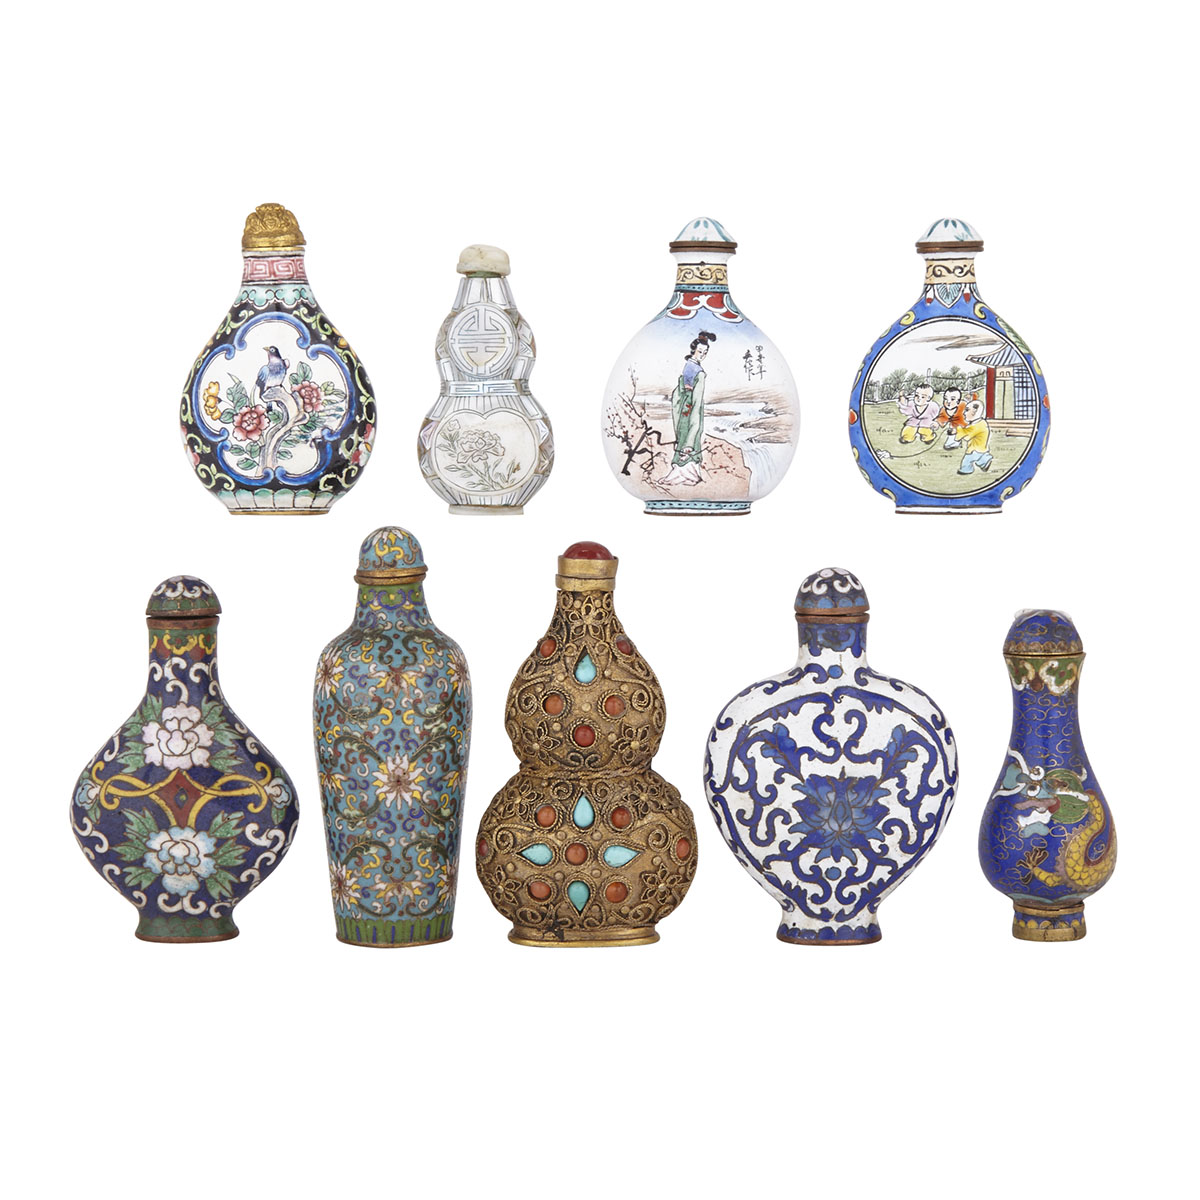 Group of Nine Snuff Bottles, 19th to 20th Century